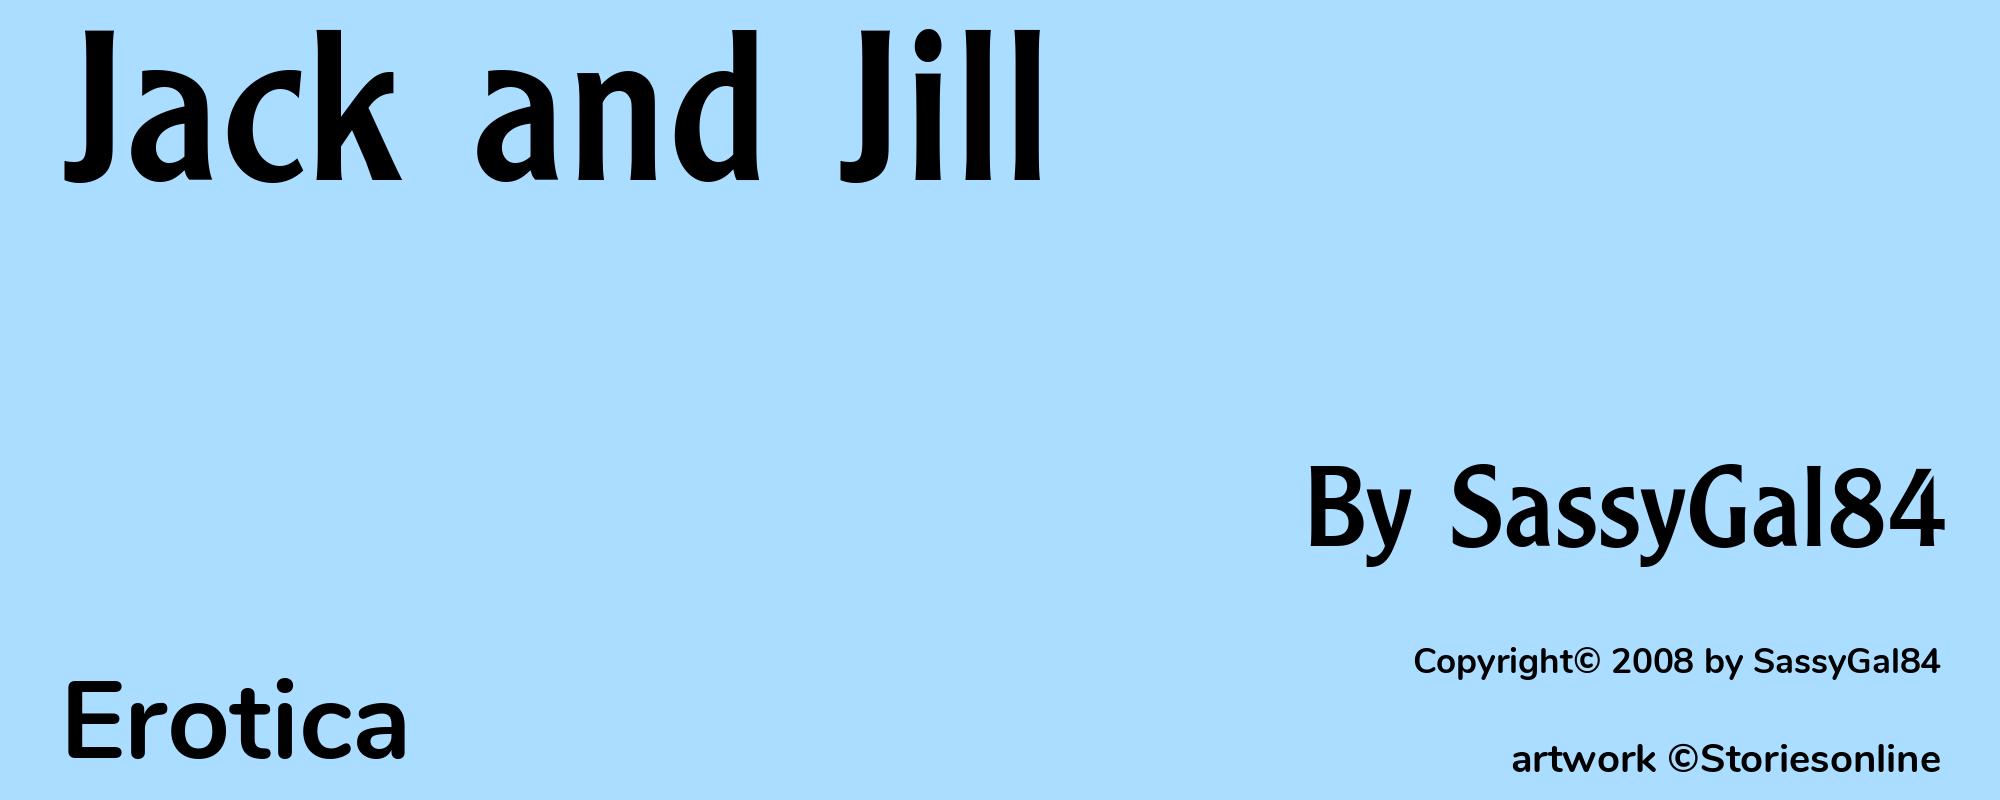 Jack and Jill - Cover